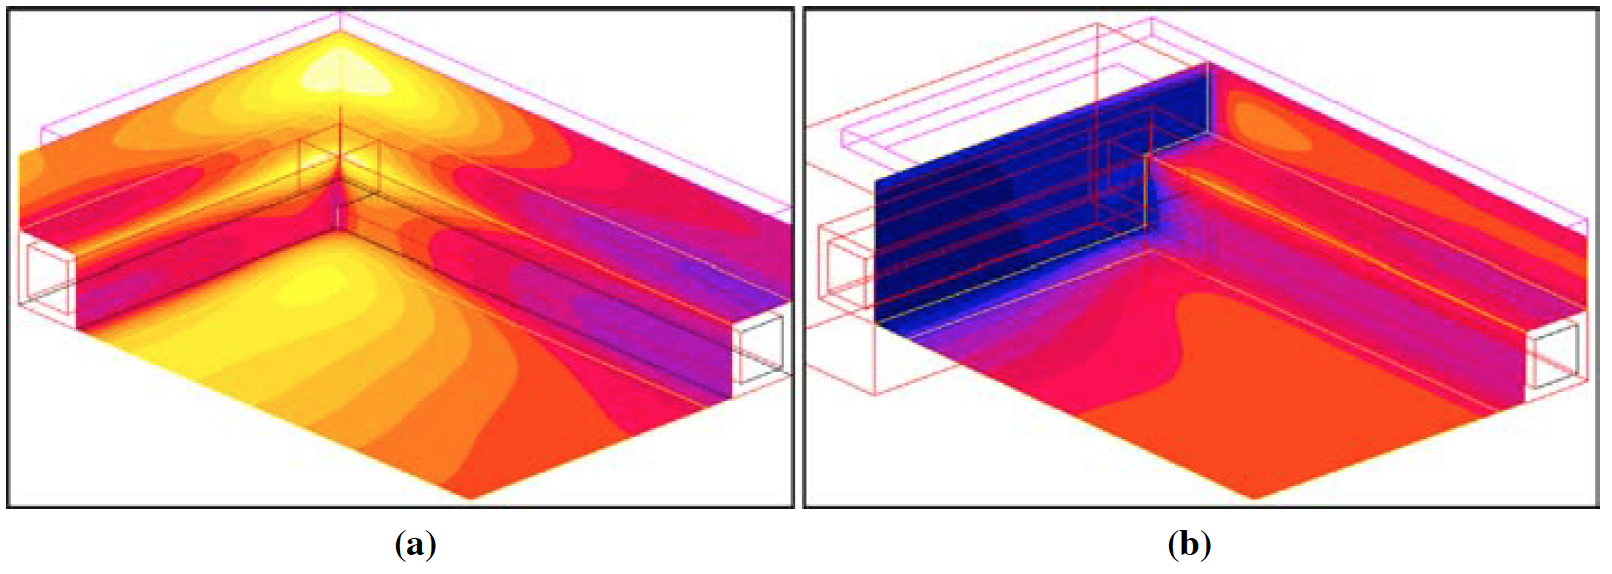 Fluxtrol | Design of Induction Coil For Generating Magnetic Field For Cancer Hyperthermia Research - Figure 8: Flux 3D thermal simulation of the concentrator using oriented pieces of Fluxtrol 75 with uniform winding size (a) and with the cross-over leg widened (b)